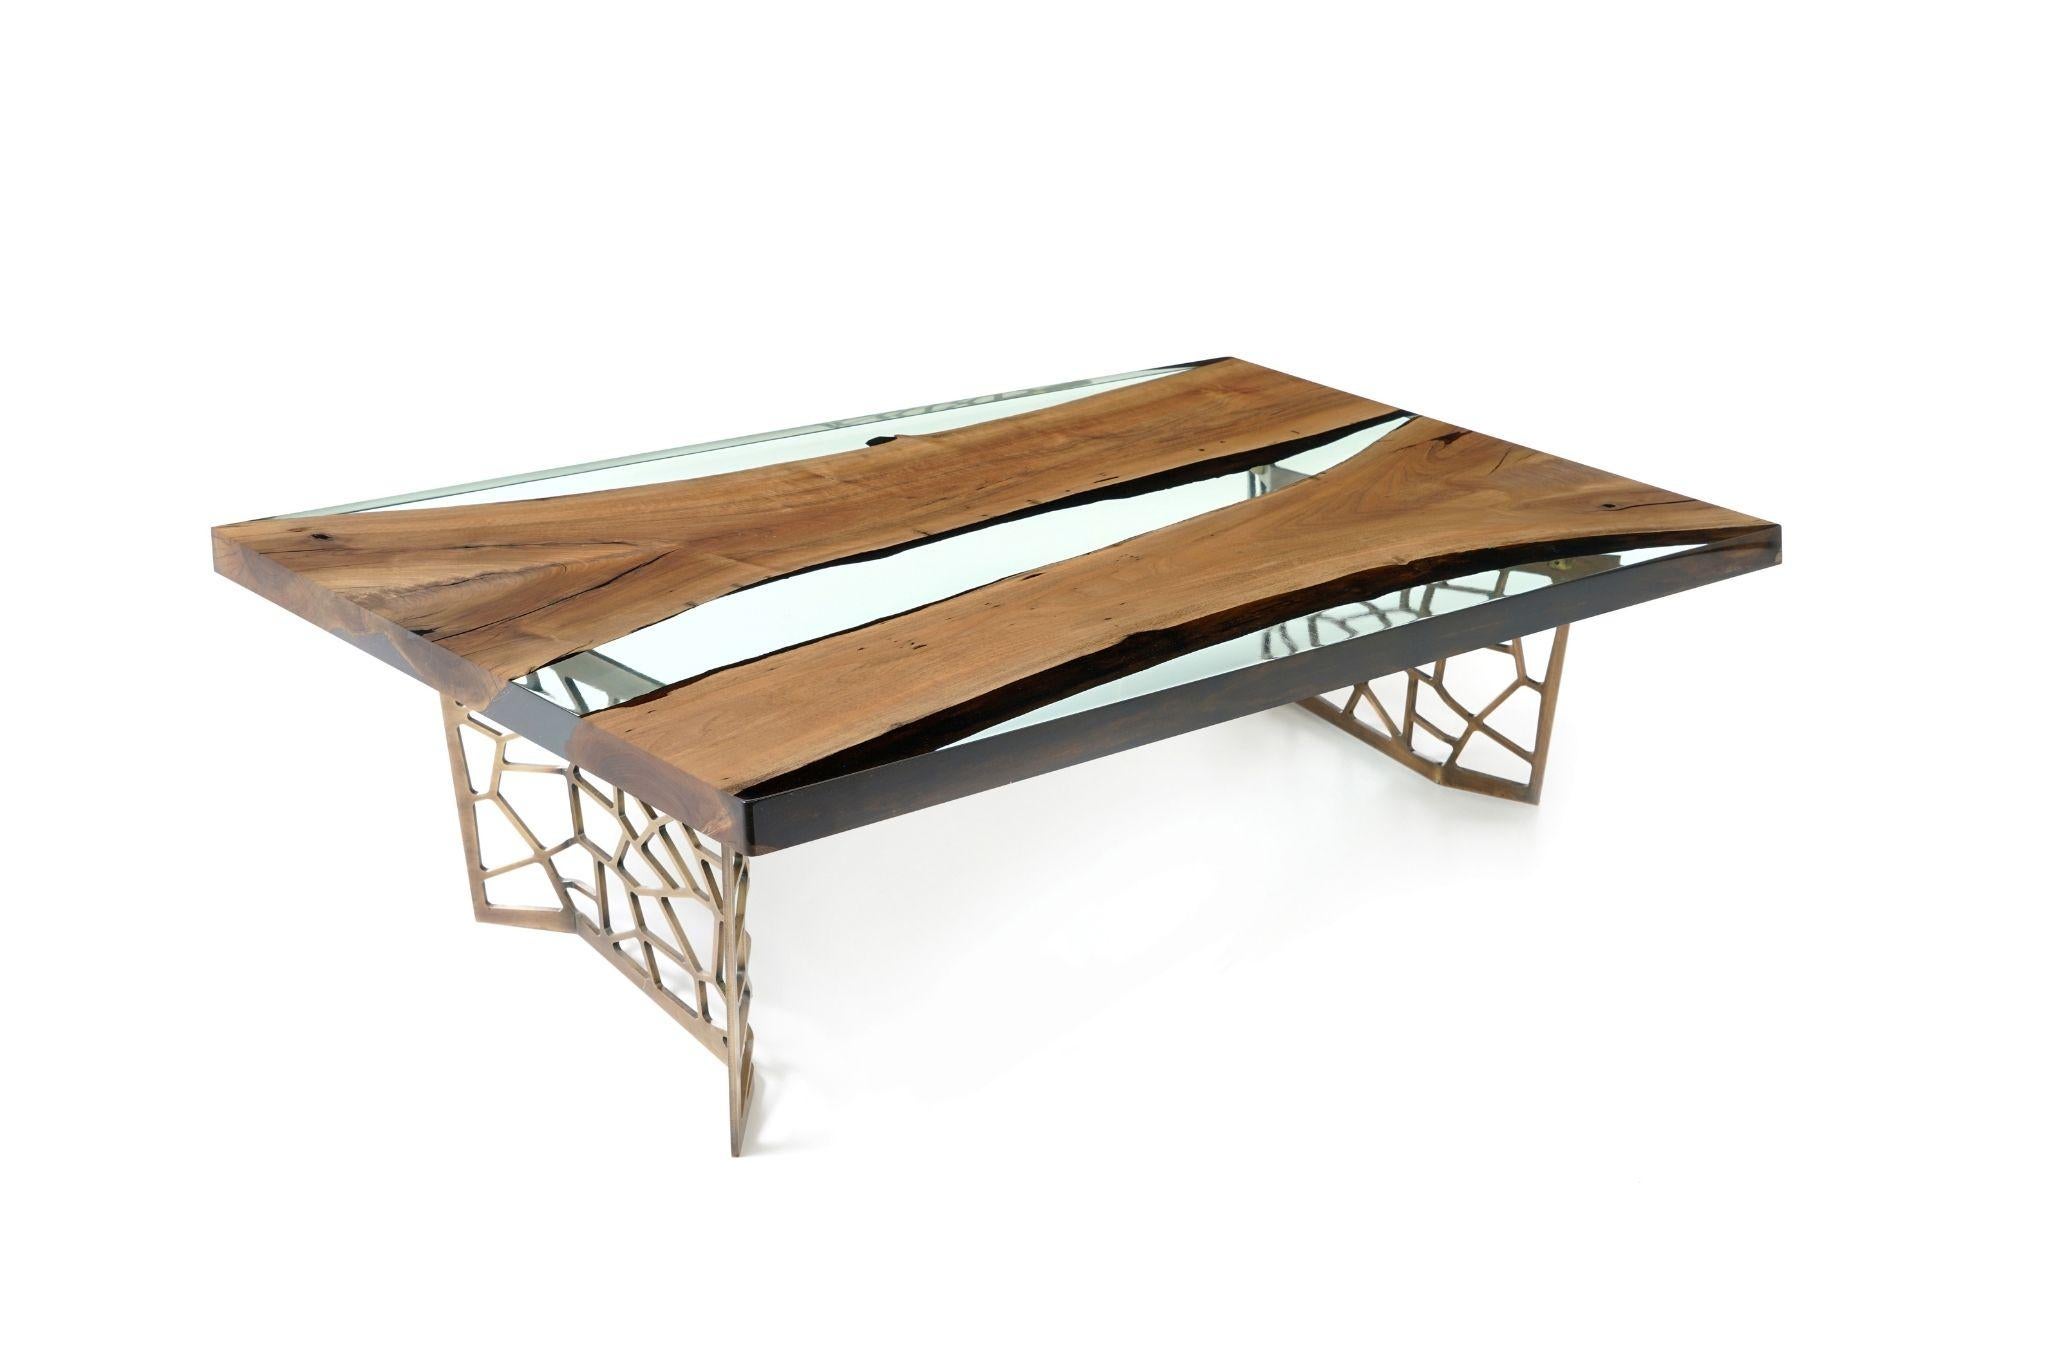 Hand-Crafted Efil Coffee Table: Great Aluminum Walnut Resin Coffee Table For Sale